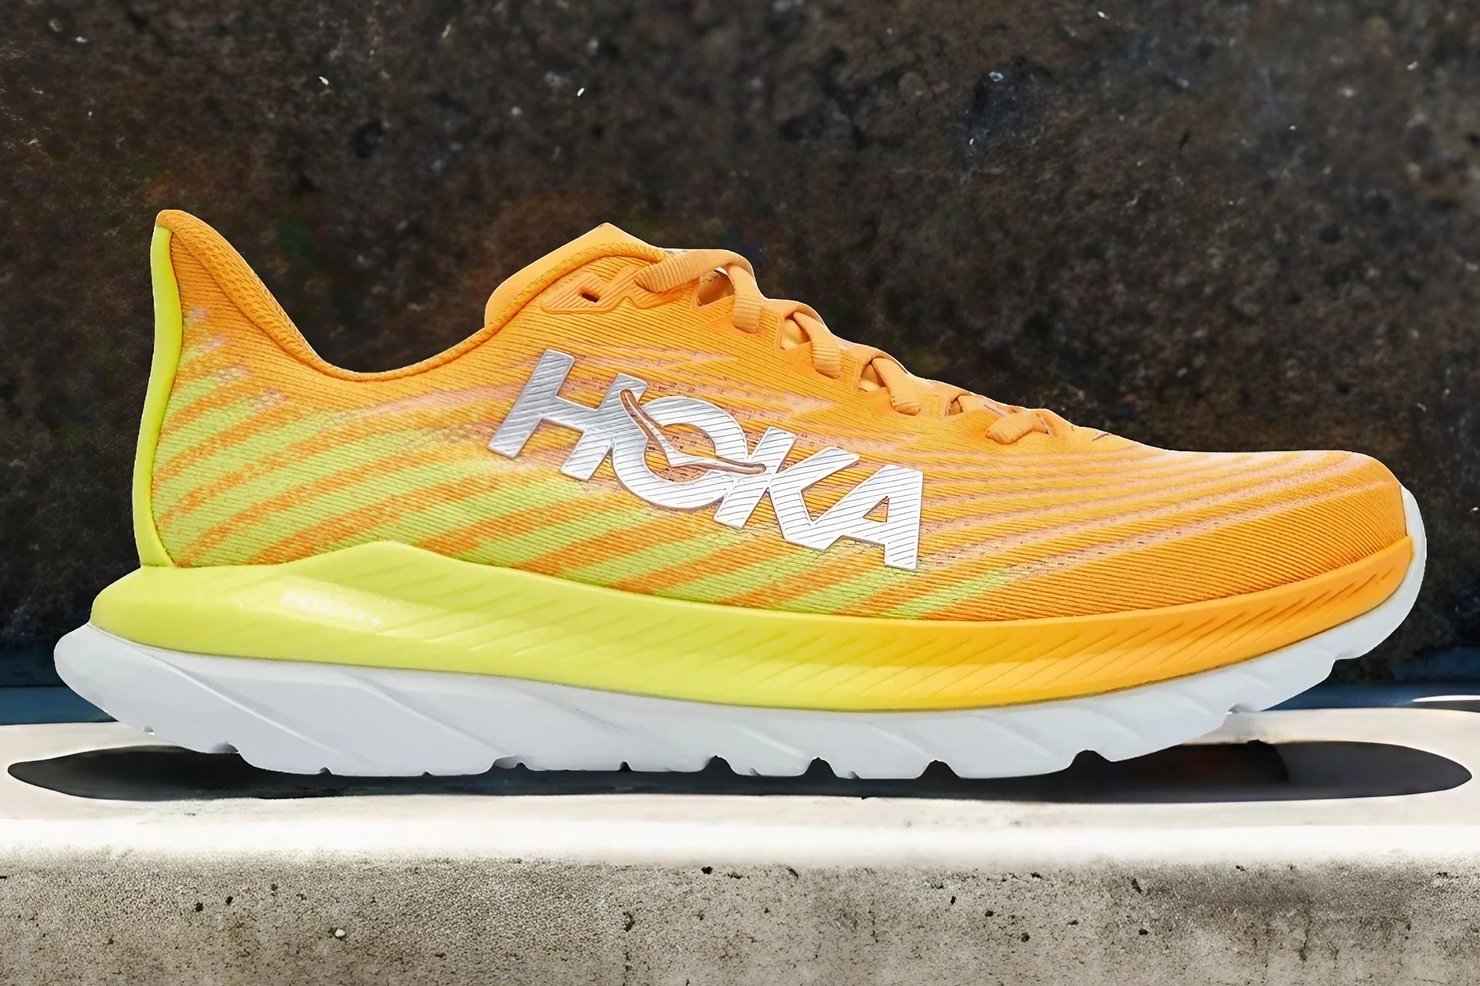 The Hoka Mach 5 in front of a rock wall.